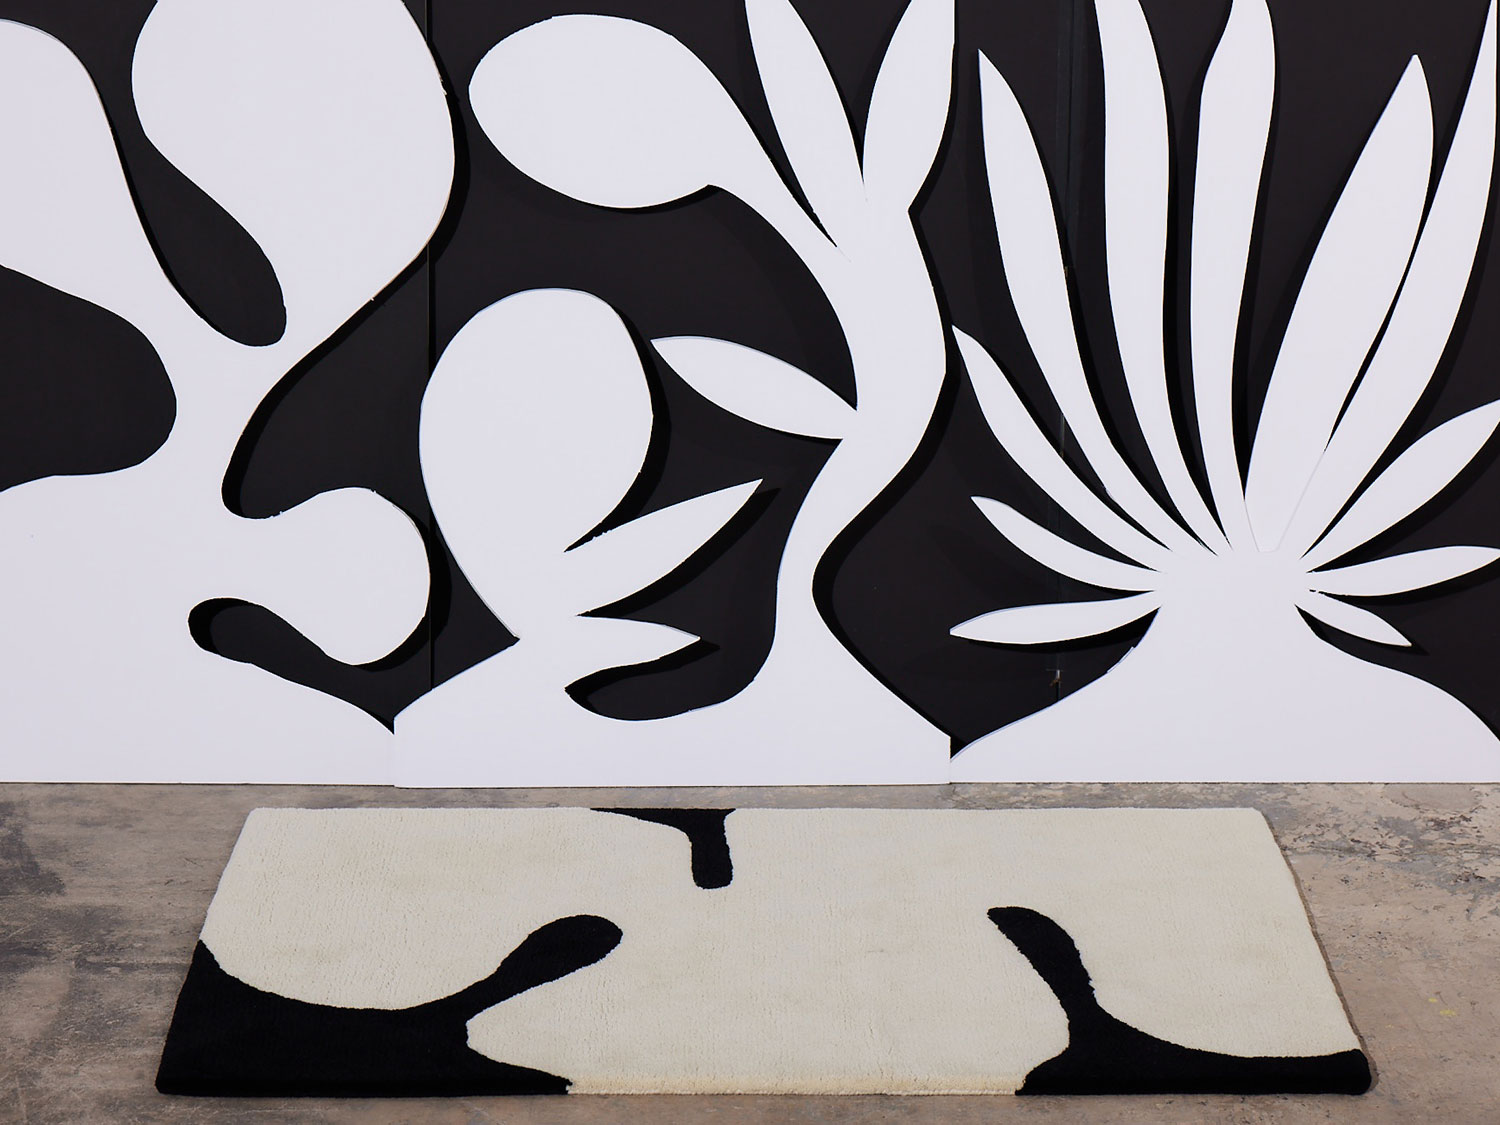 Astrud Coconut area rug by Angela Adams against a black and white patterned background